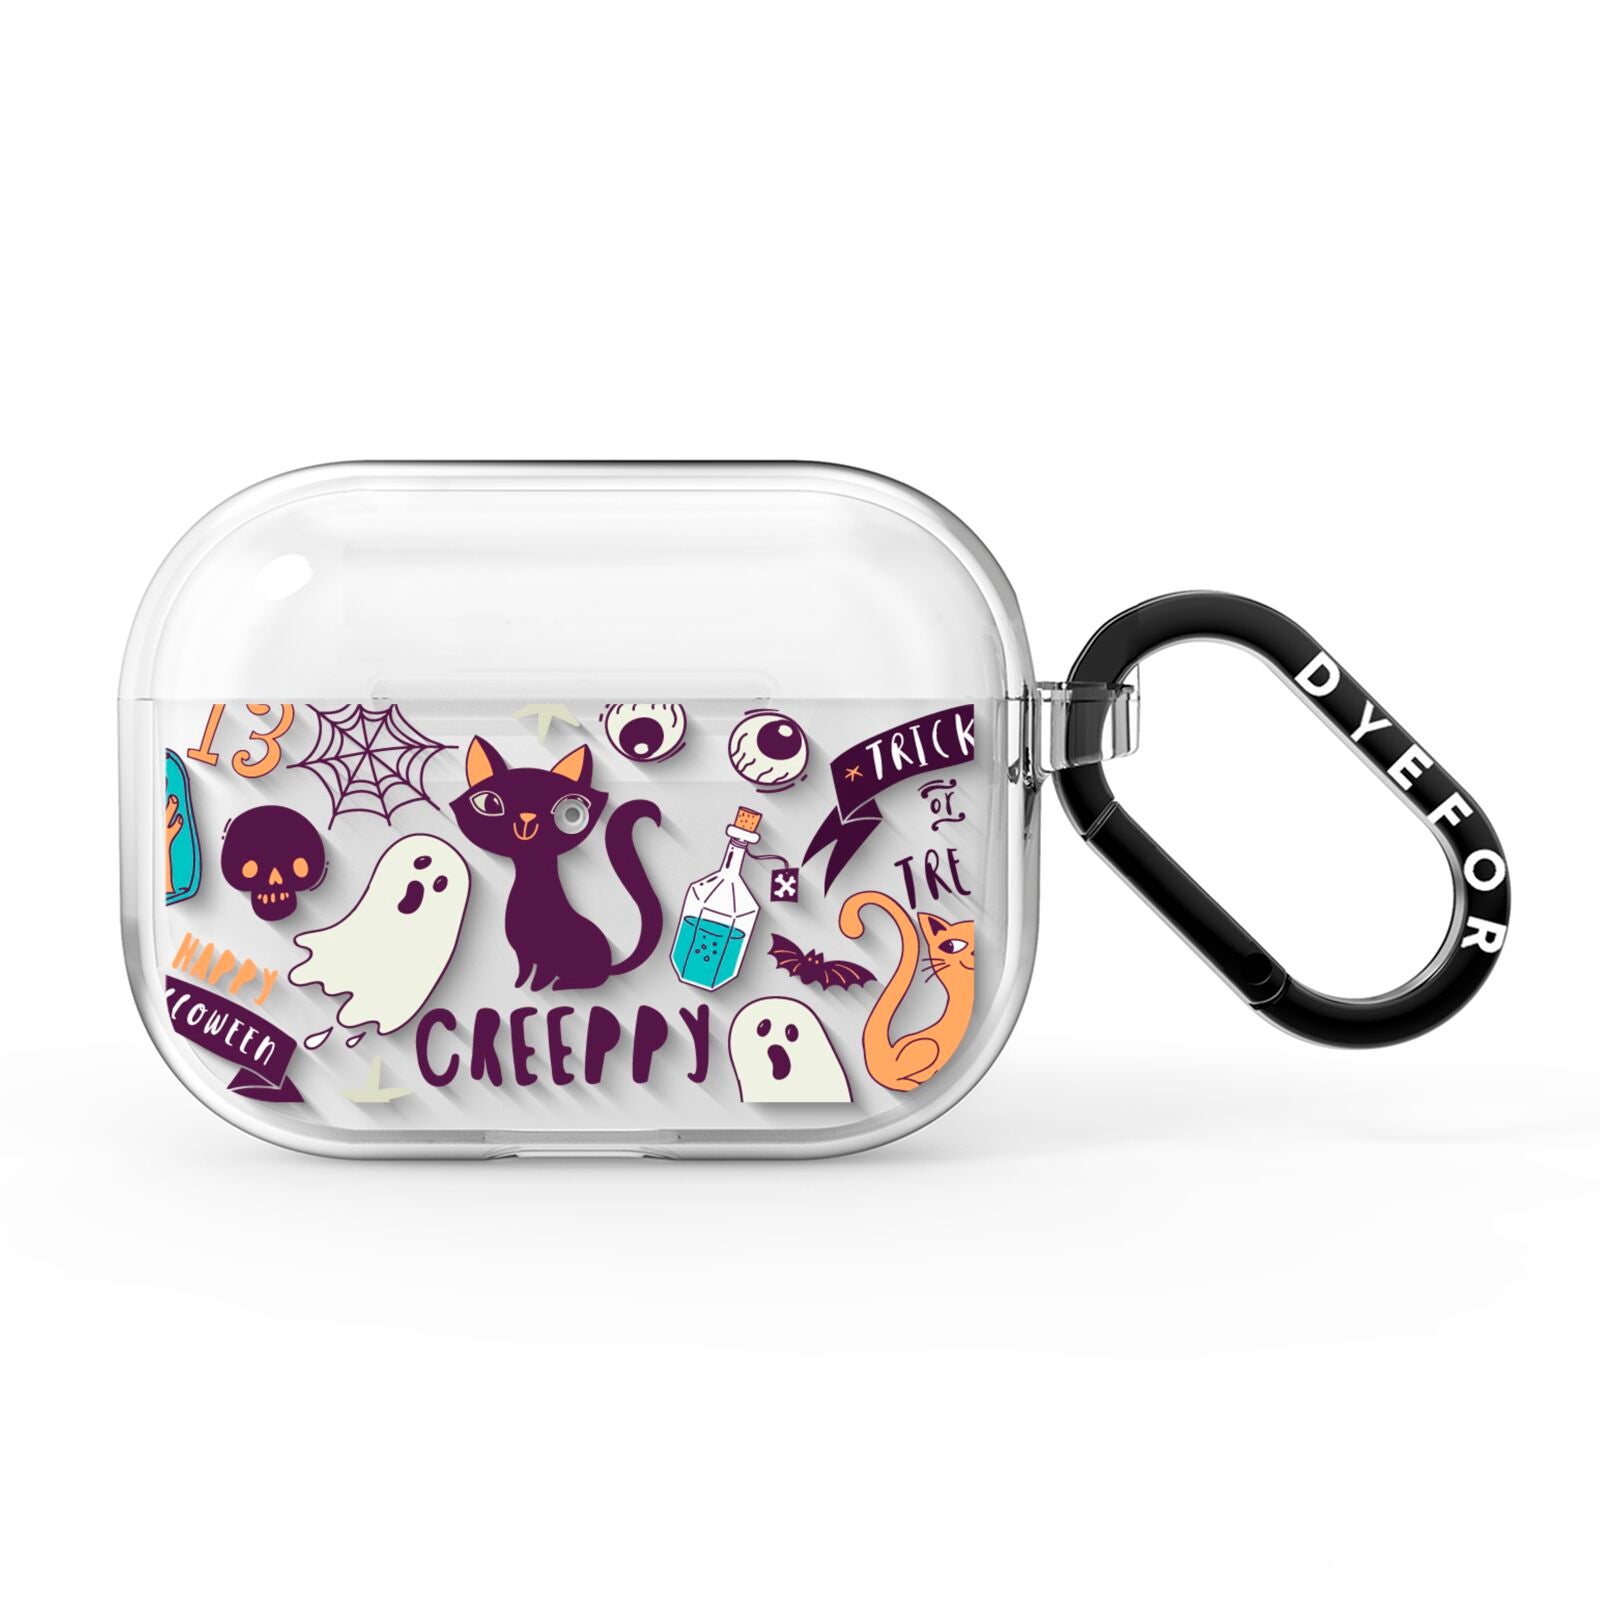 Wacky Purple and Orange Halloween Images AirPods Pro Clear Case